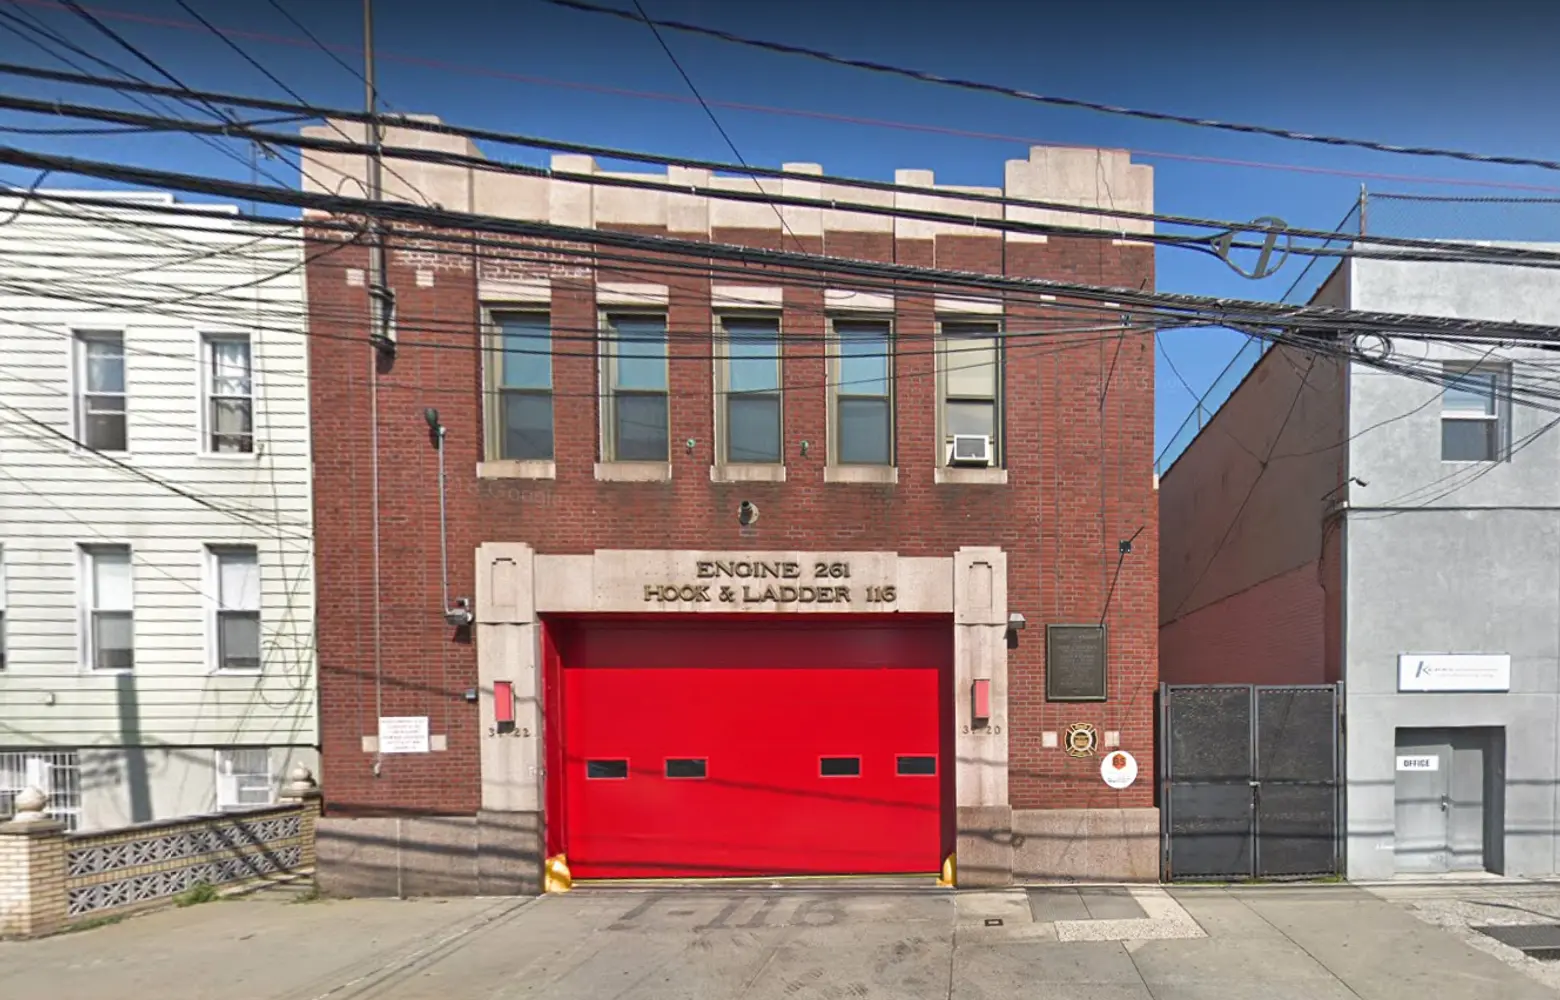 FDNY says Amazon’s HQ2 may overwhelm an already stretched LIC fire department